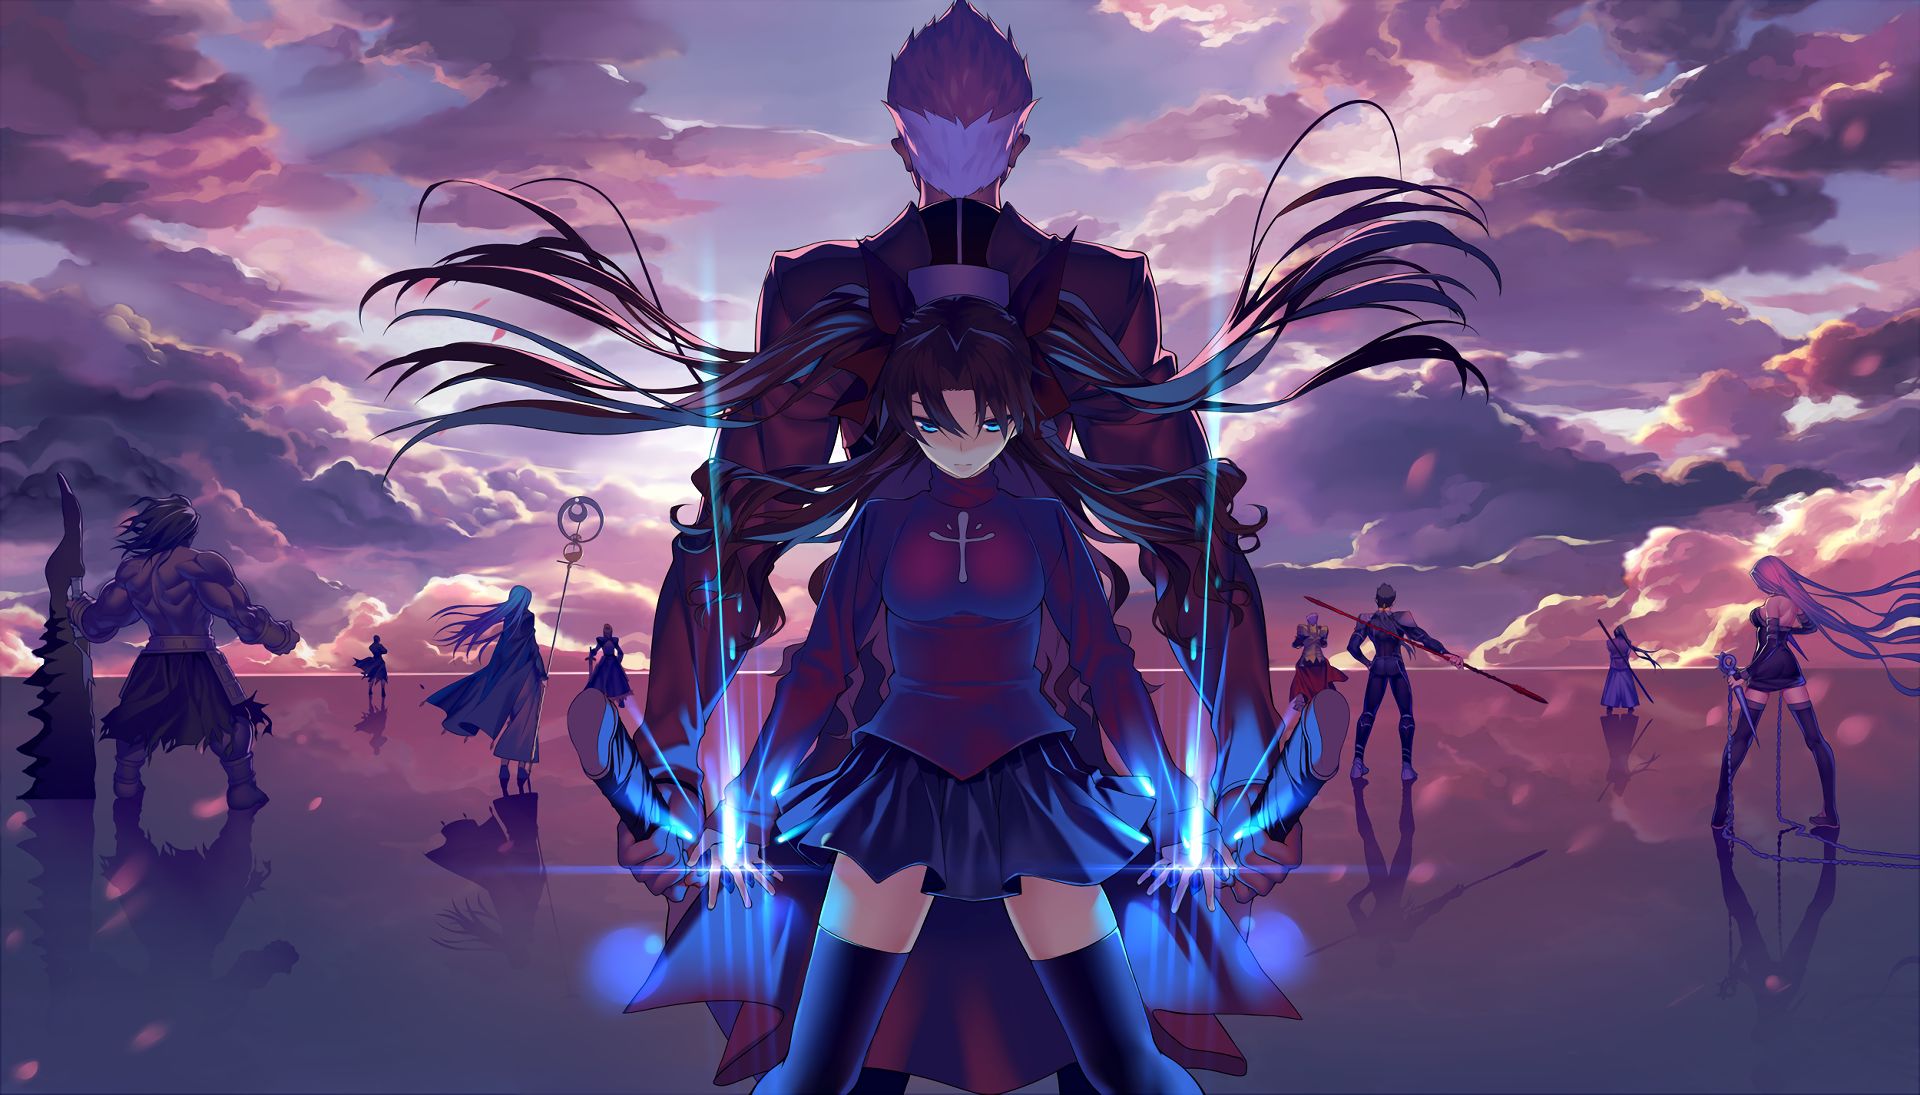 skirt, anime, rin tohsaka, blue eyes, fate series, cloud, sword, reflection, fate/stay night: unlimited blade works, archer (fate/stay night), staff, thigh highs, weapon 8K